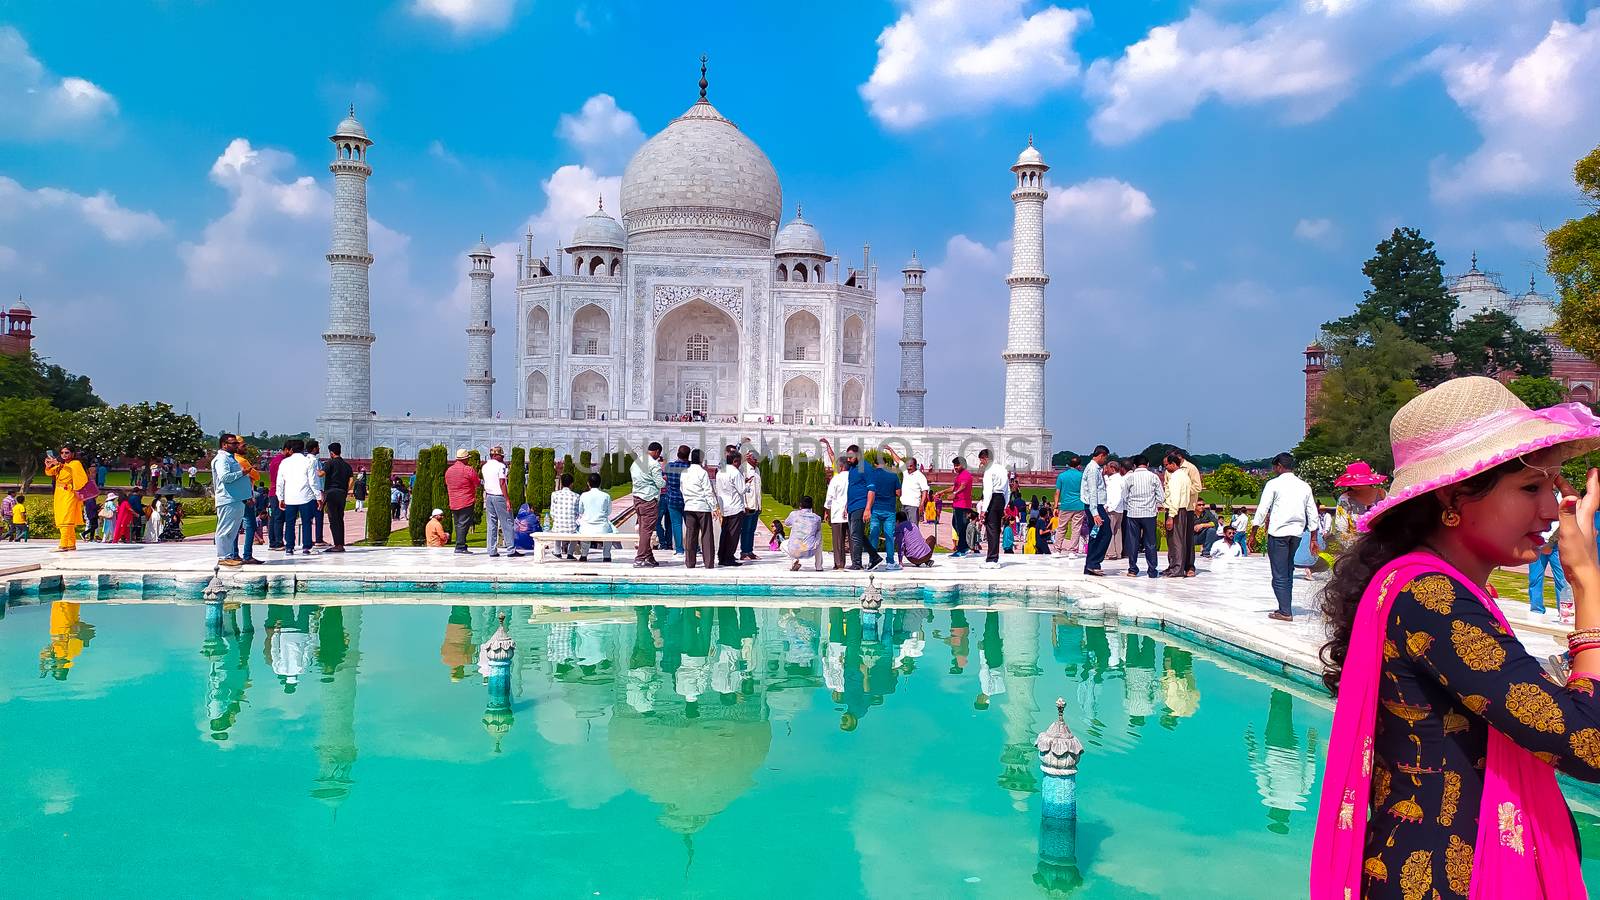 Front view of Taj Mahal with fountain pond in the foreground in sunny summer day. Taj Mahal tomb with reflection in the water at blue dramatic sky in Agra, Uttar Pradesh, India South Asia Pac May 2019